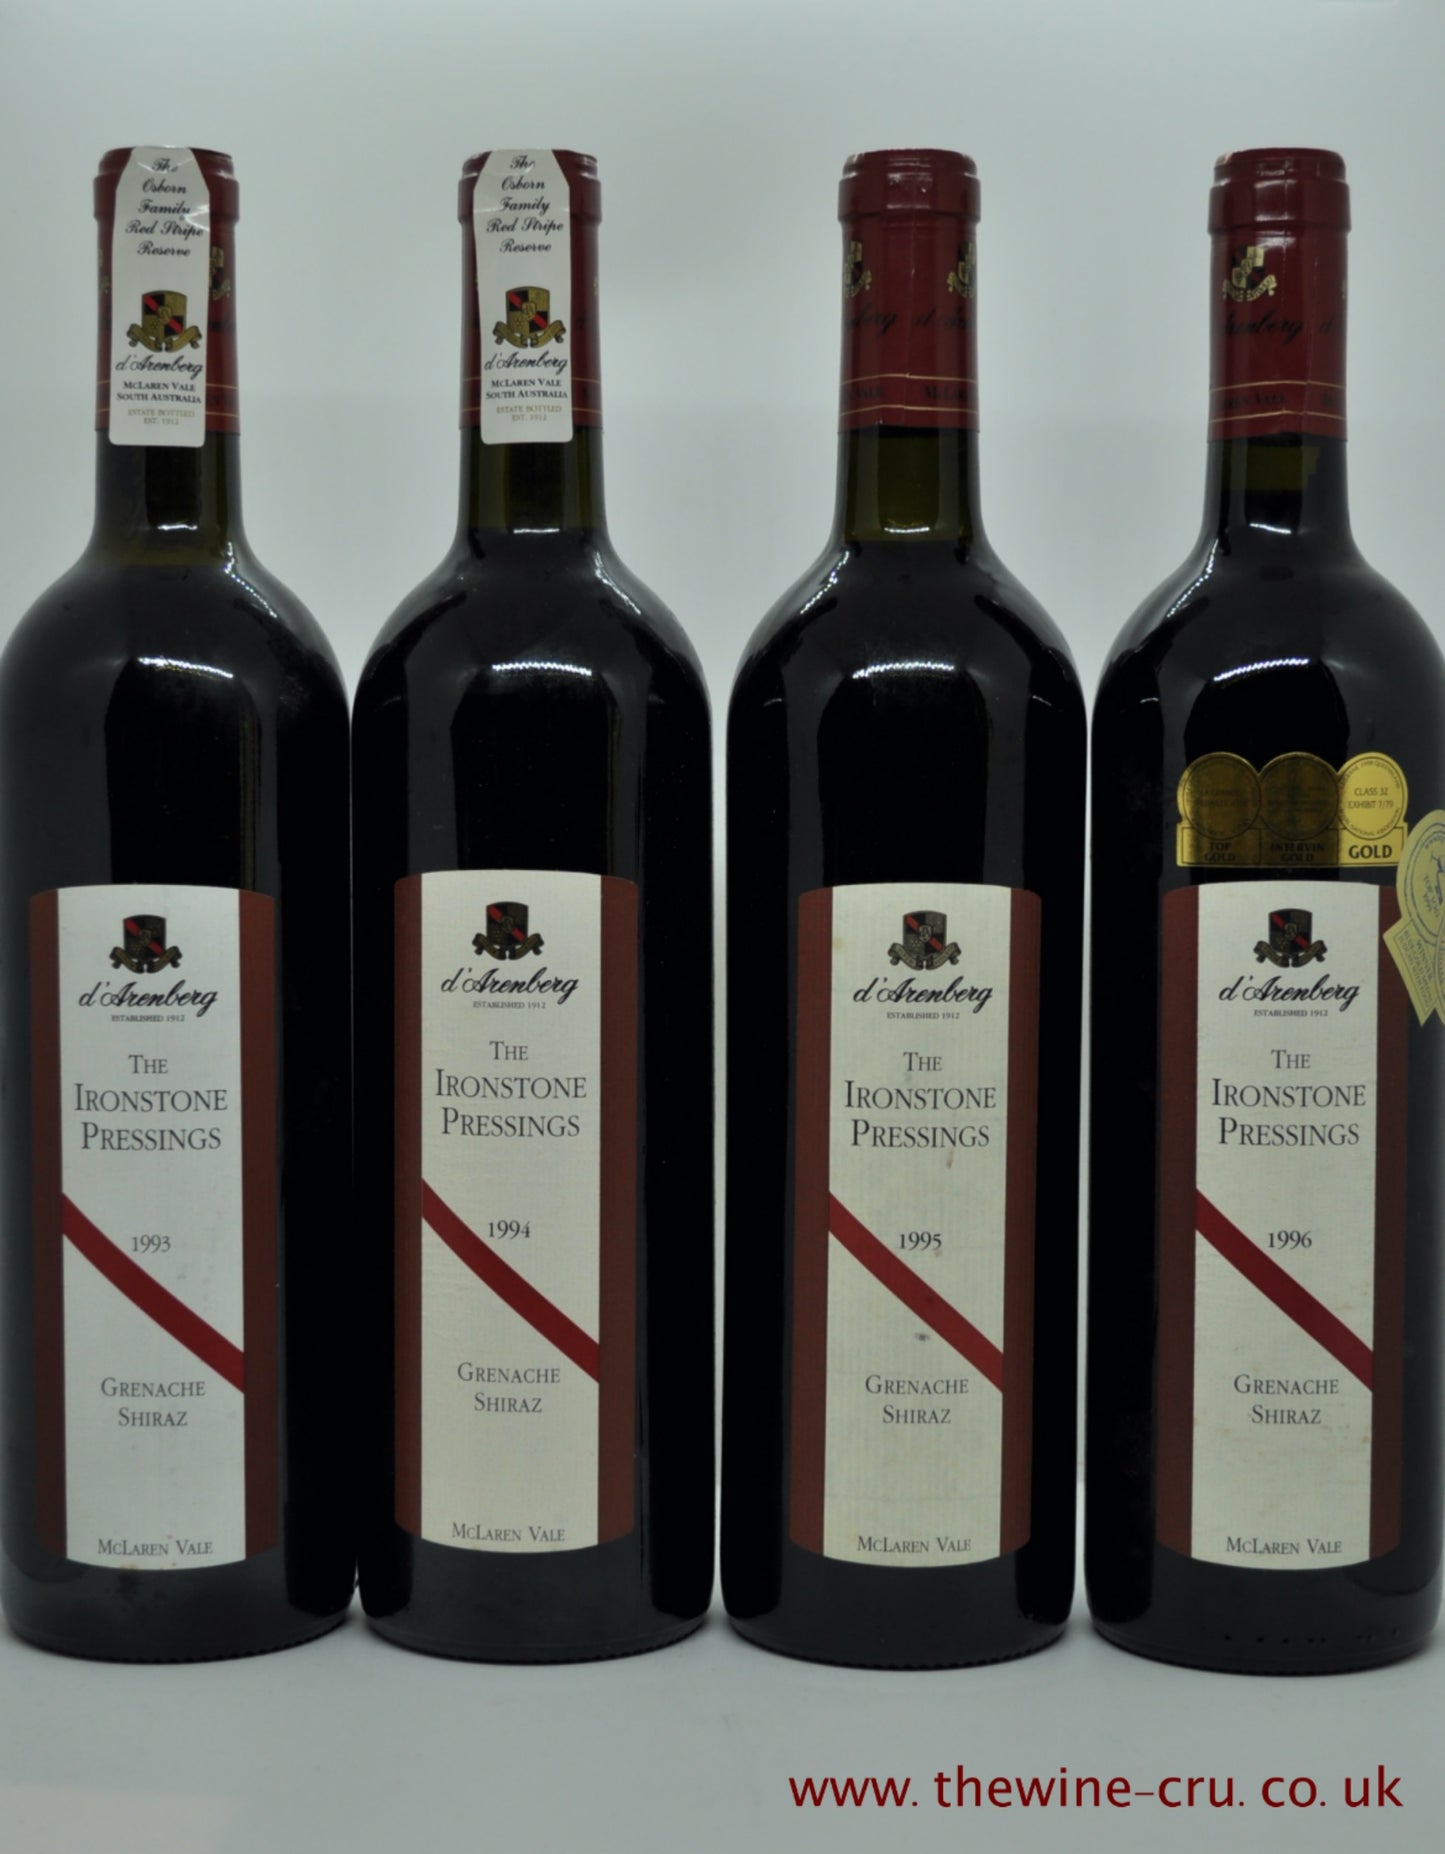 A four bottle vertical tasting of d'Arenberg The Ironstone Pressings vintage red wine. Vintages 1993 to 1996. Australia. Immediate delivery. Free local delivery. Gift wrapping available.